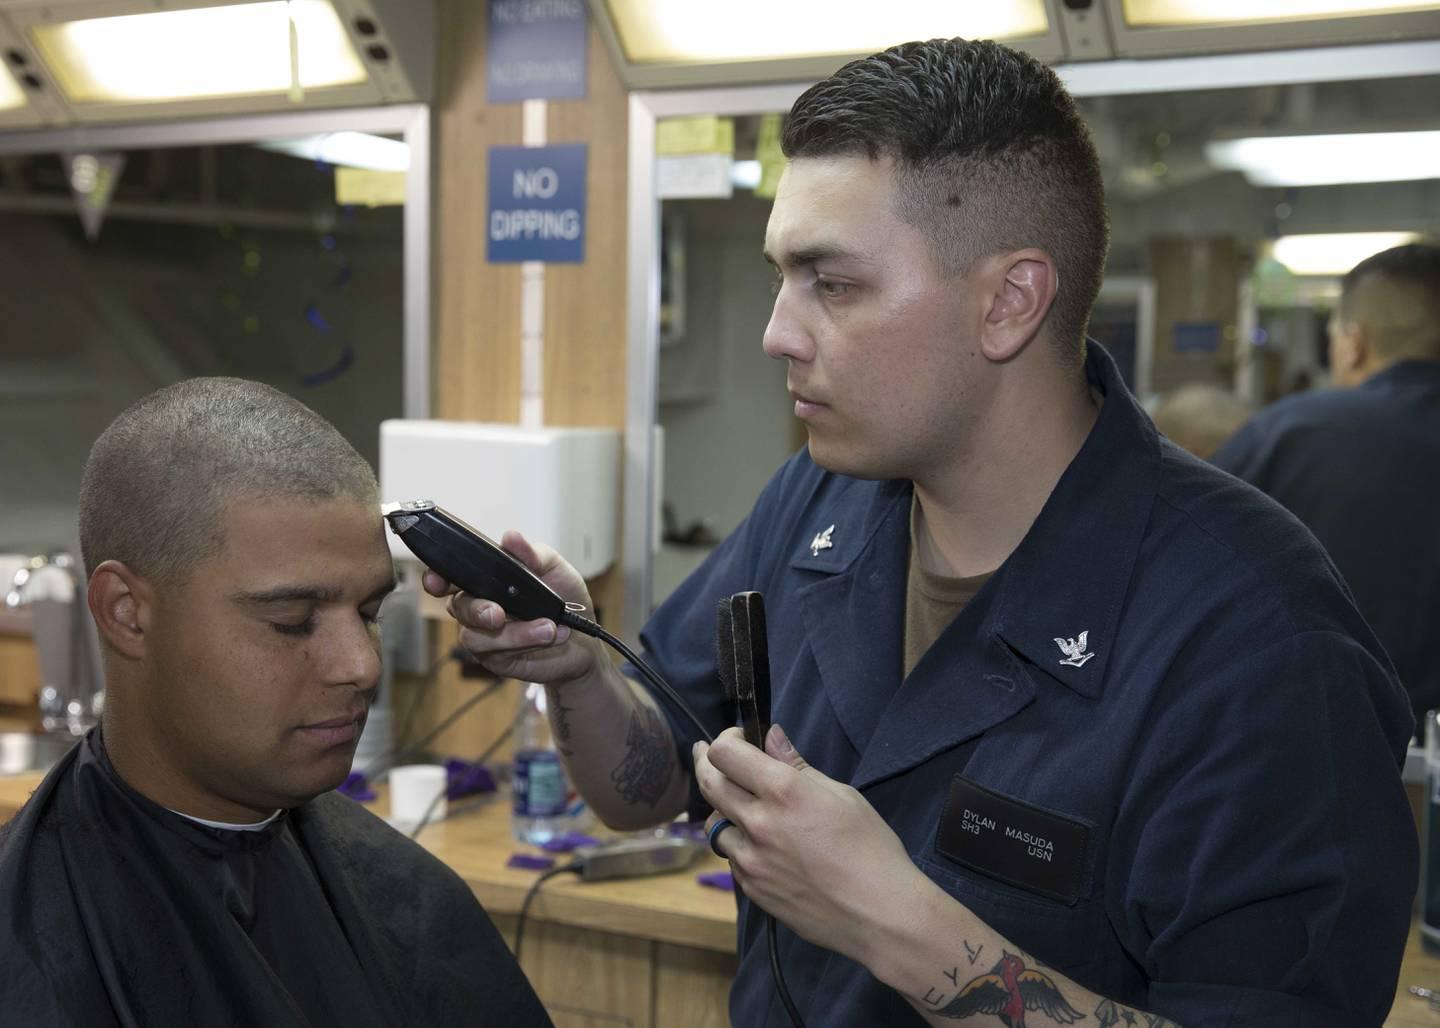 Ship's Serviceman 3rd Class Dylan Masuda cuts the hair of Hospital Corpsman 2nd Class Terence Parsons in the ship's barber shop onboard the amphibious assault ship Bataan. (MC3 Alan L. Robertson/Navy) Navy unveils series of uniform updates on hairstyle, earrings, high heels and smartwatches